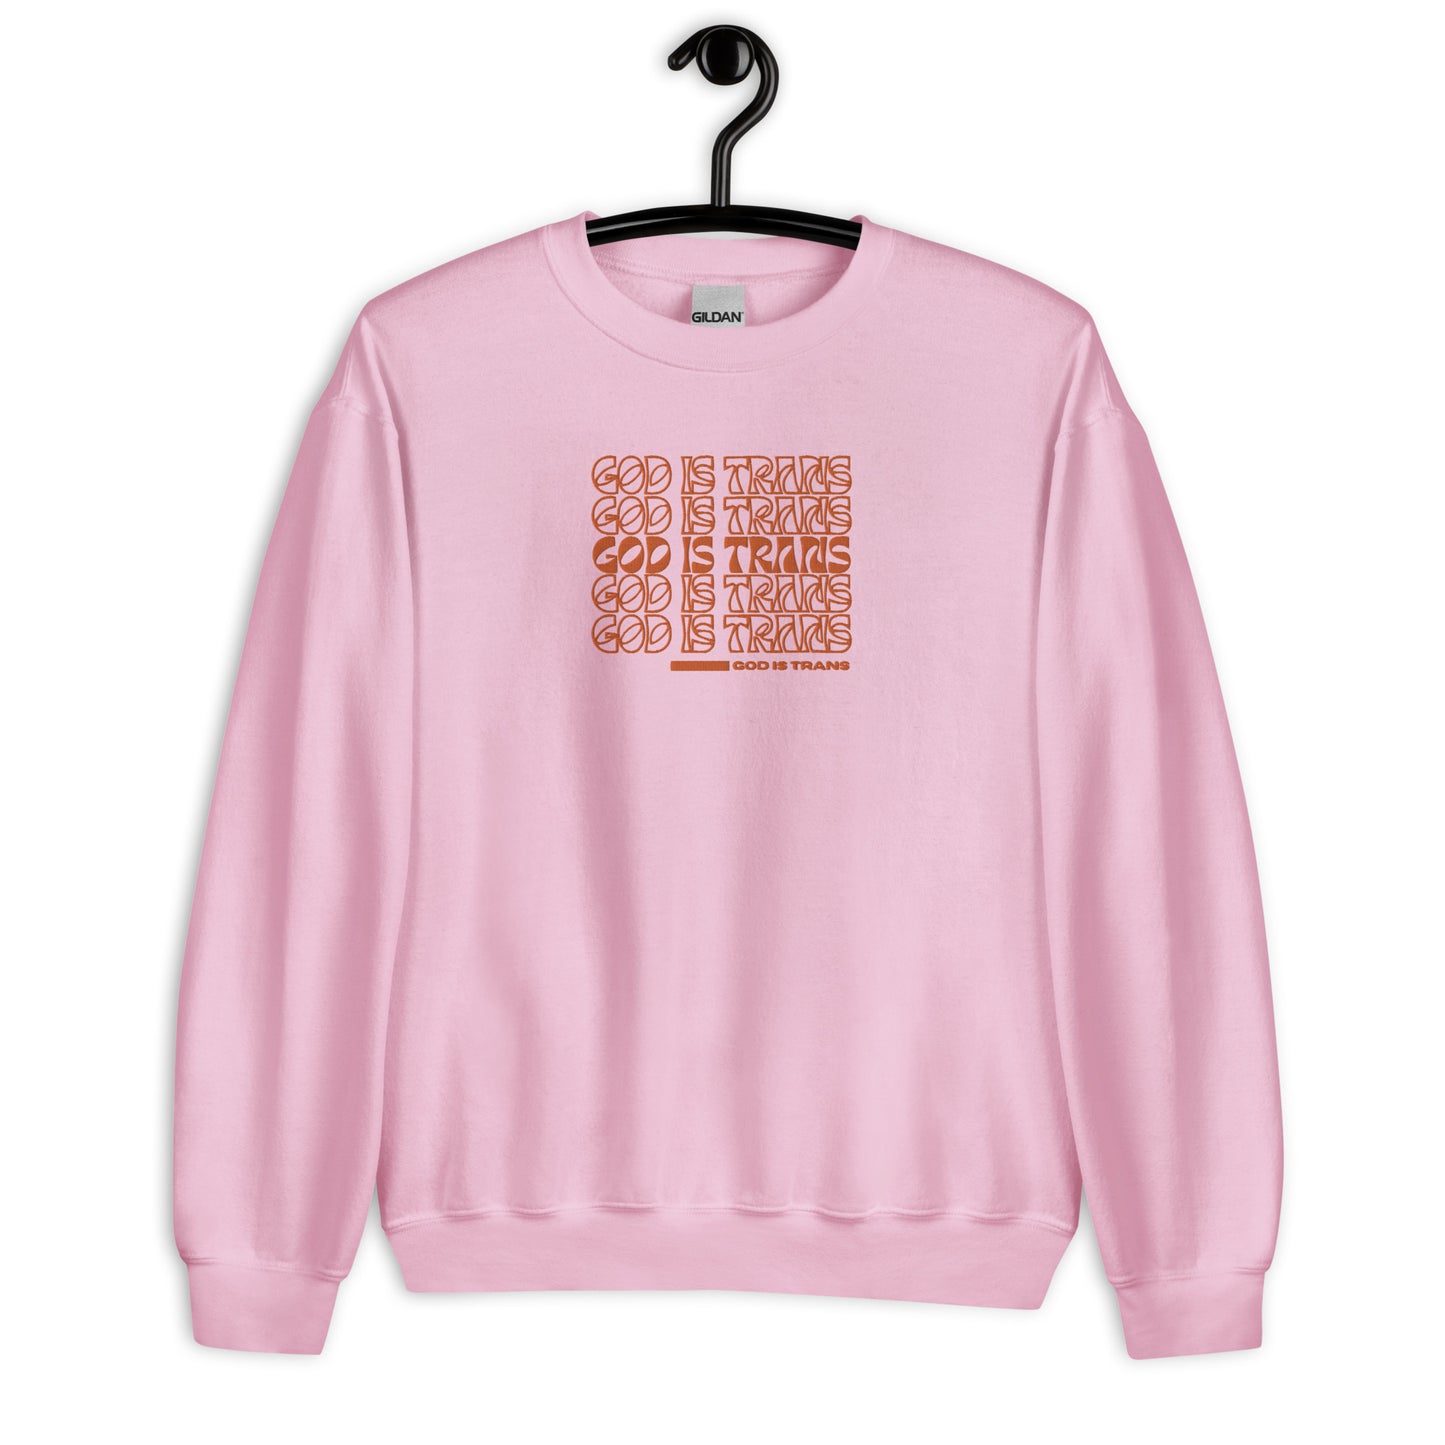 GOD IS TRANS - Embroidered Crewneck